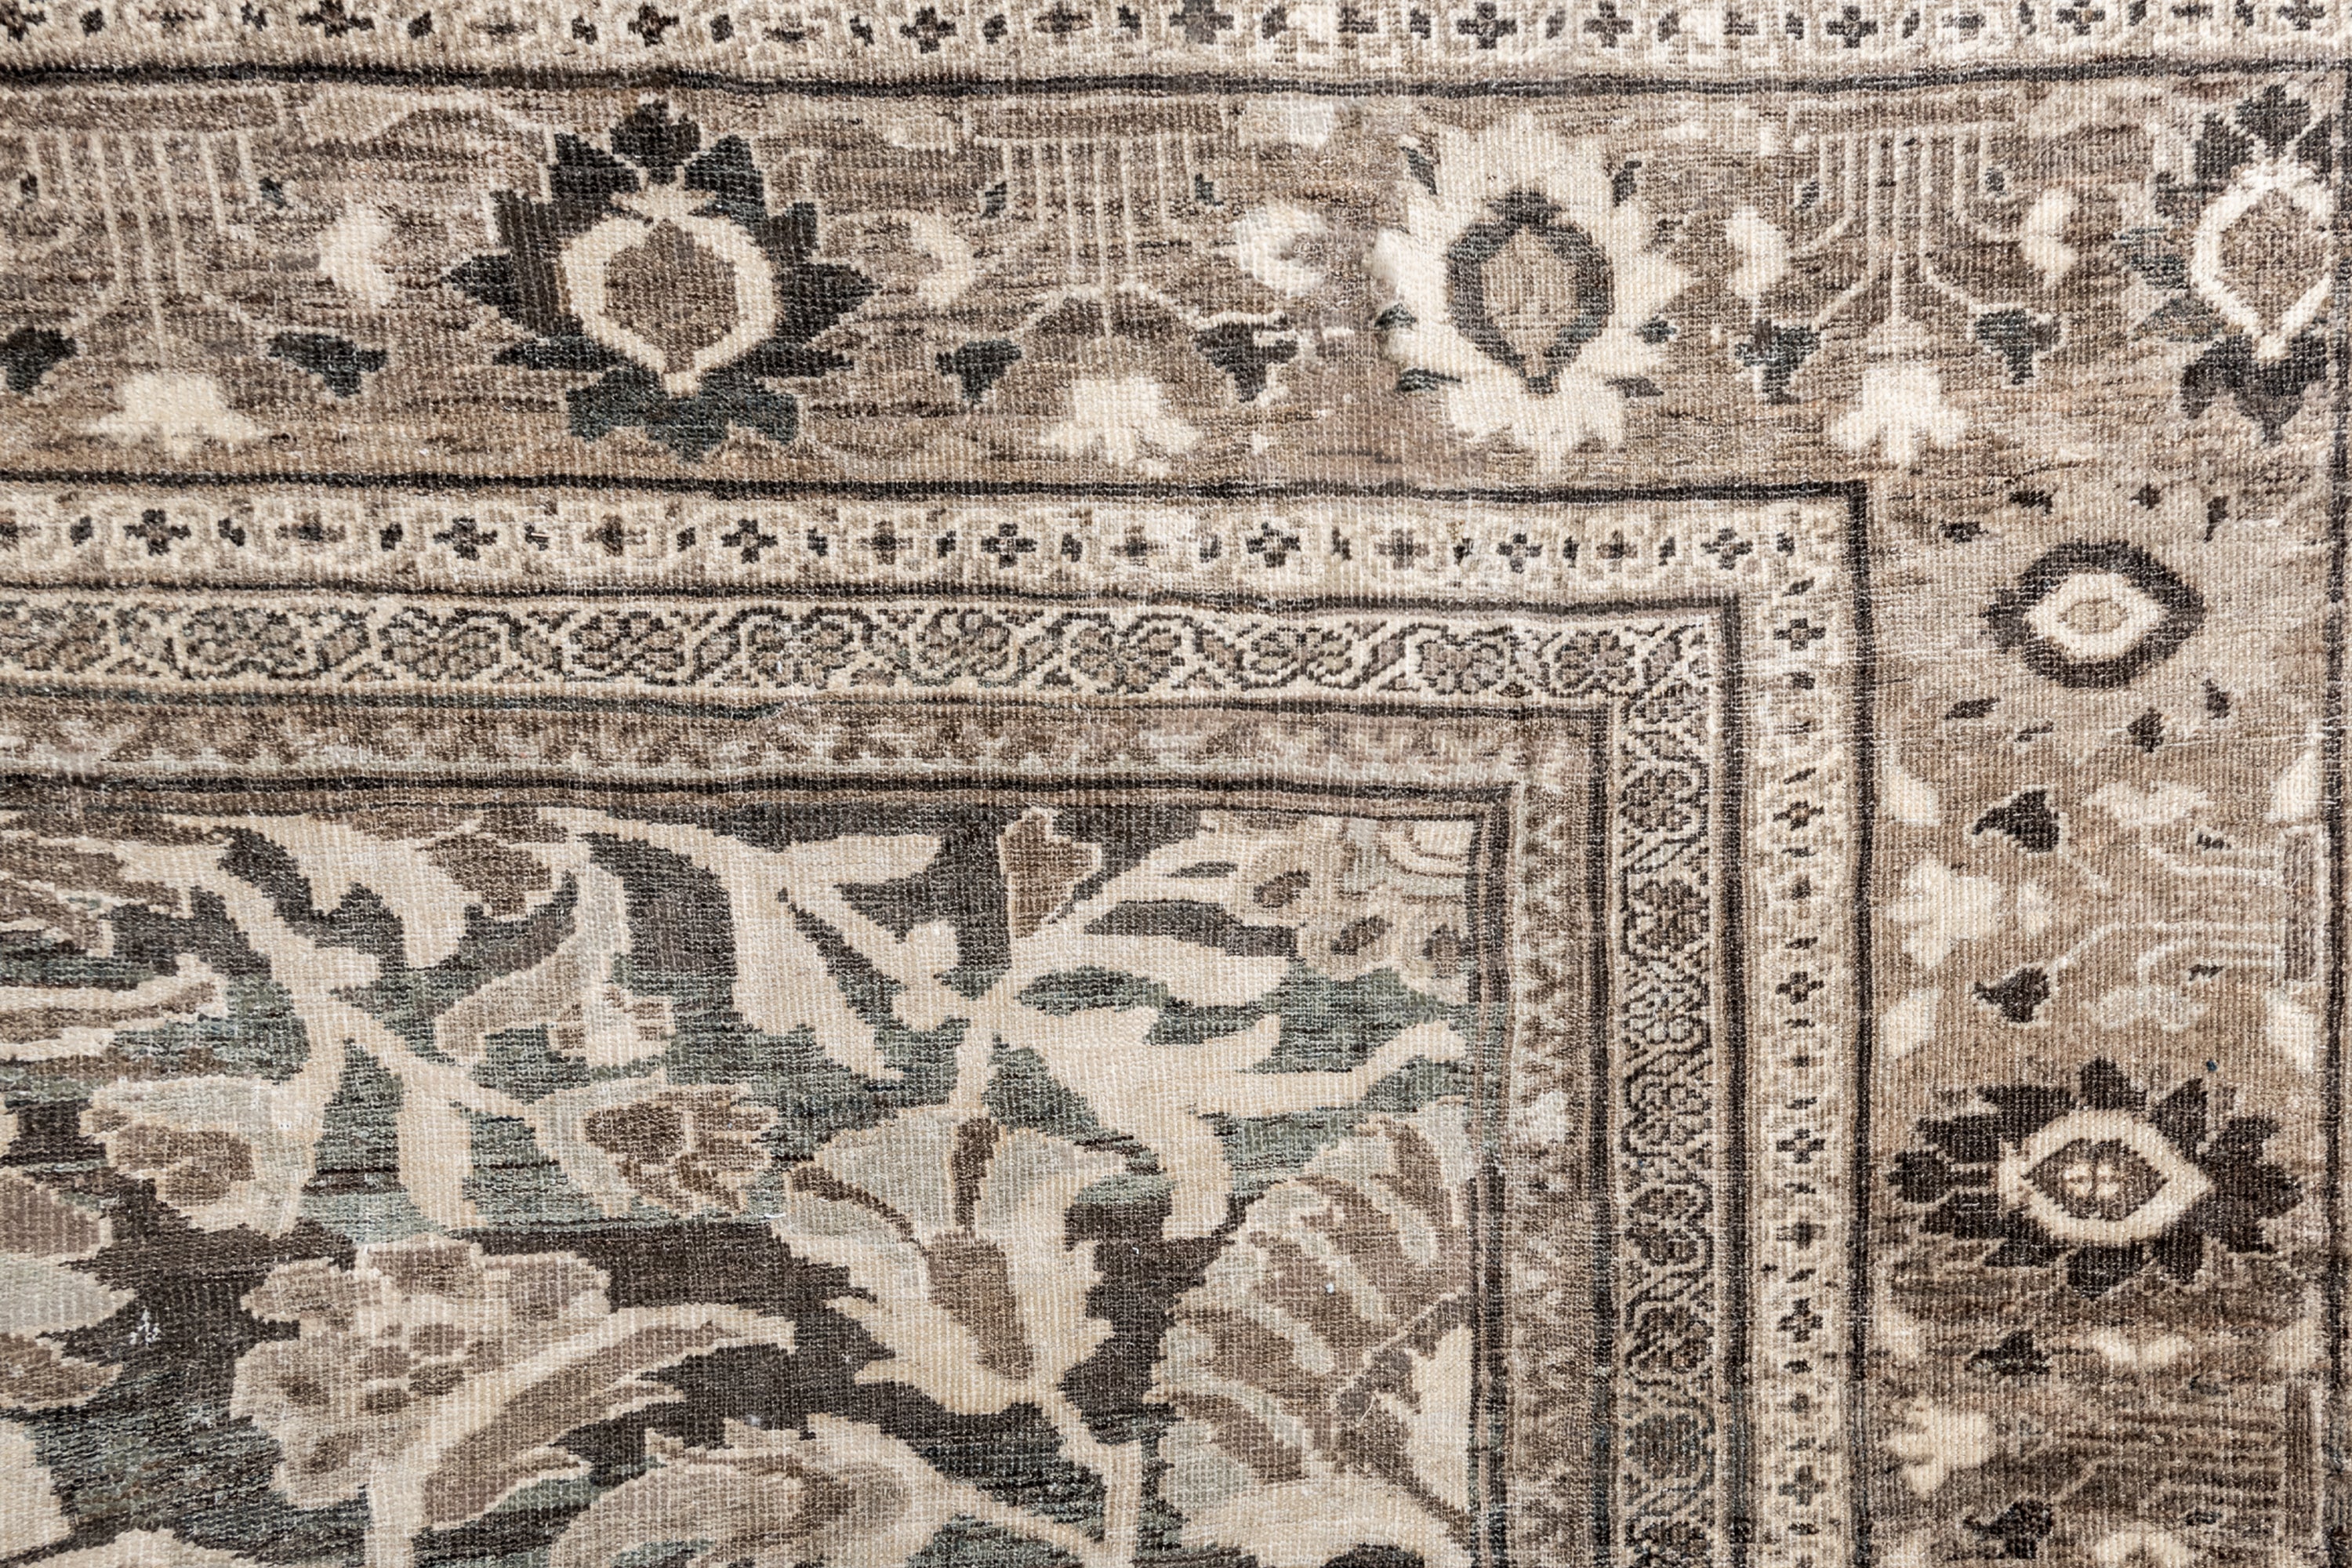 SULTANABAD RUG, AR31074/6739, WEST PERSIA, 13'10" X 19'9" - thumbnail 4